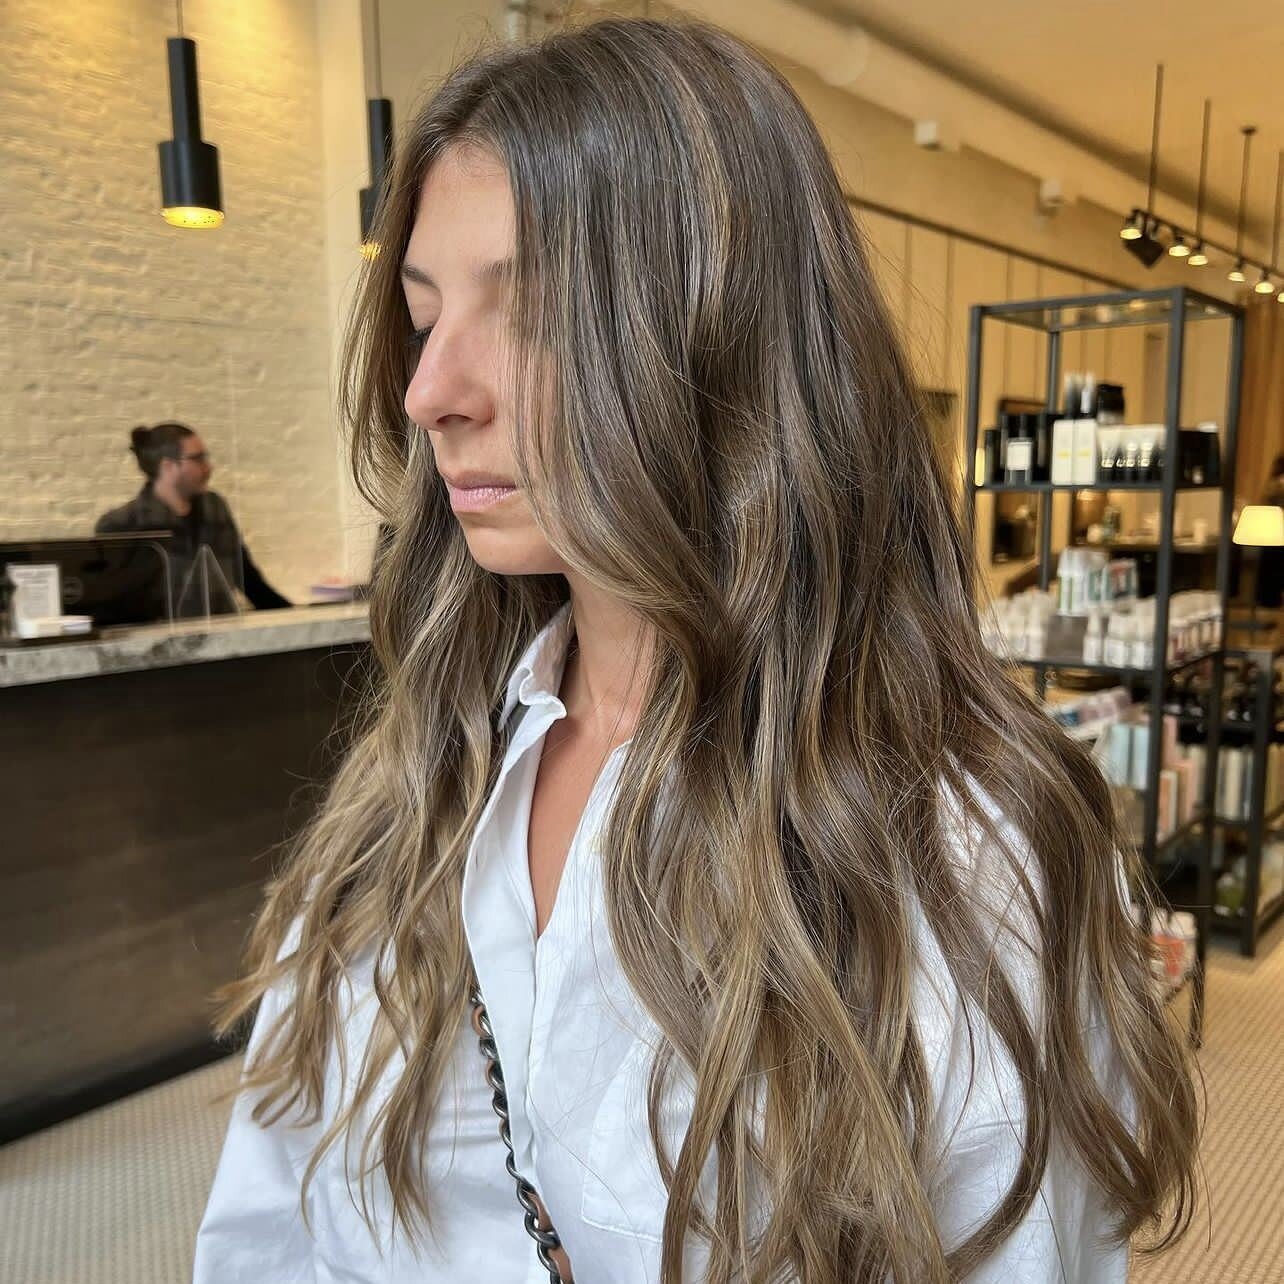 Recipe for the perfect visit to Michael and Michael Salon: fresh cut, flawless color! @lexanuccio's subtle brunette balayage is the ultimate hair transformation! Cut by @scottcutsmyhair. This look is pure perfection.⁠
⁠
▪️ Book your next consultation